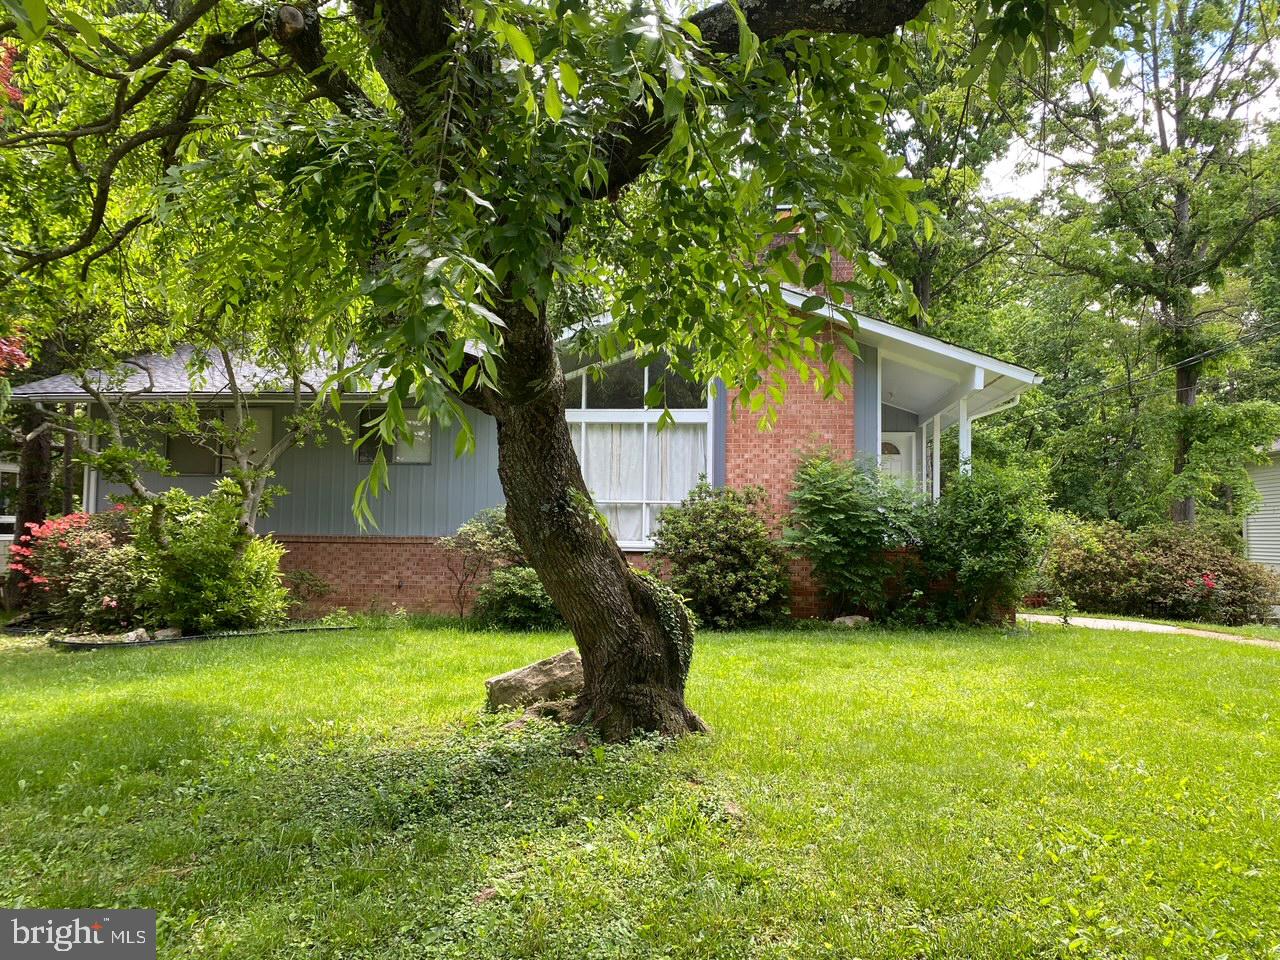 a front view of a house with yard and green space